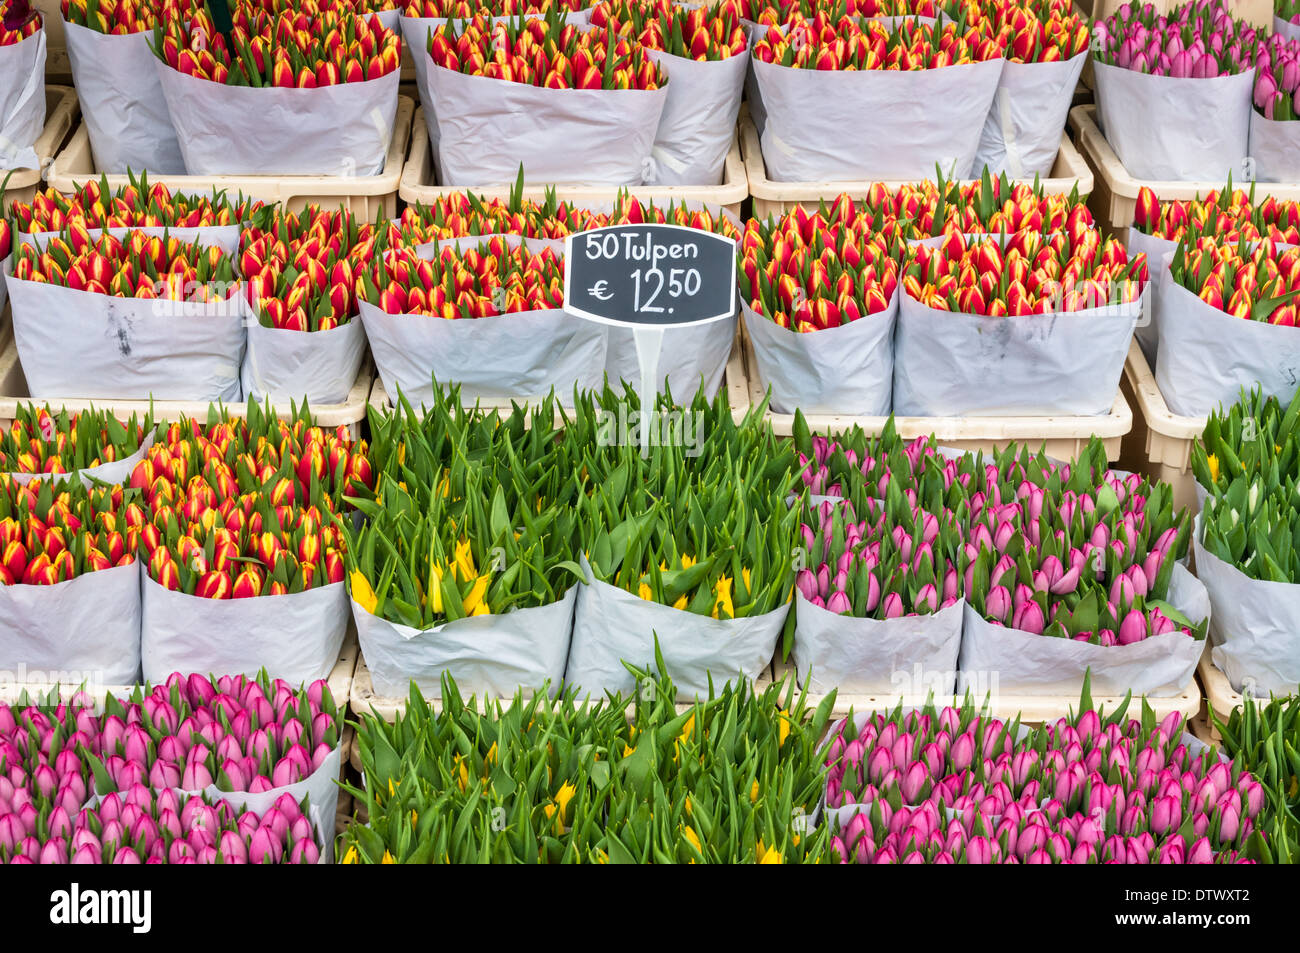 Tulips for sale at Amsterdam flower market, Amsterdam Netherlands Stock Photo